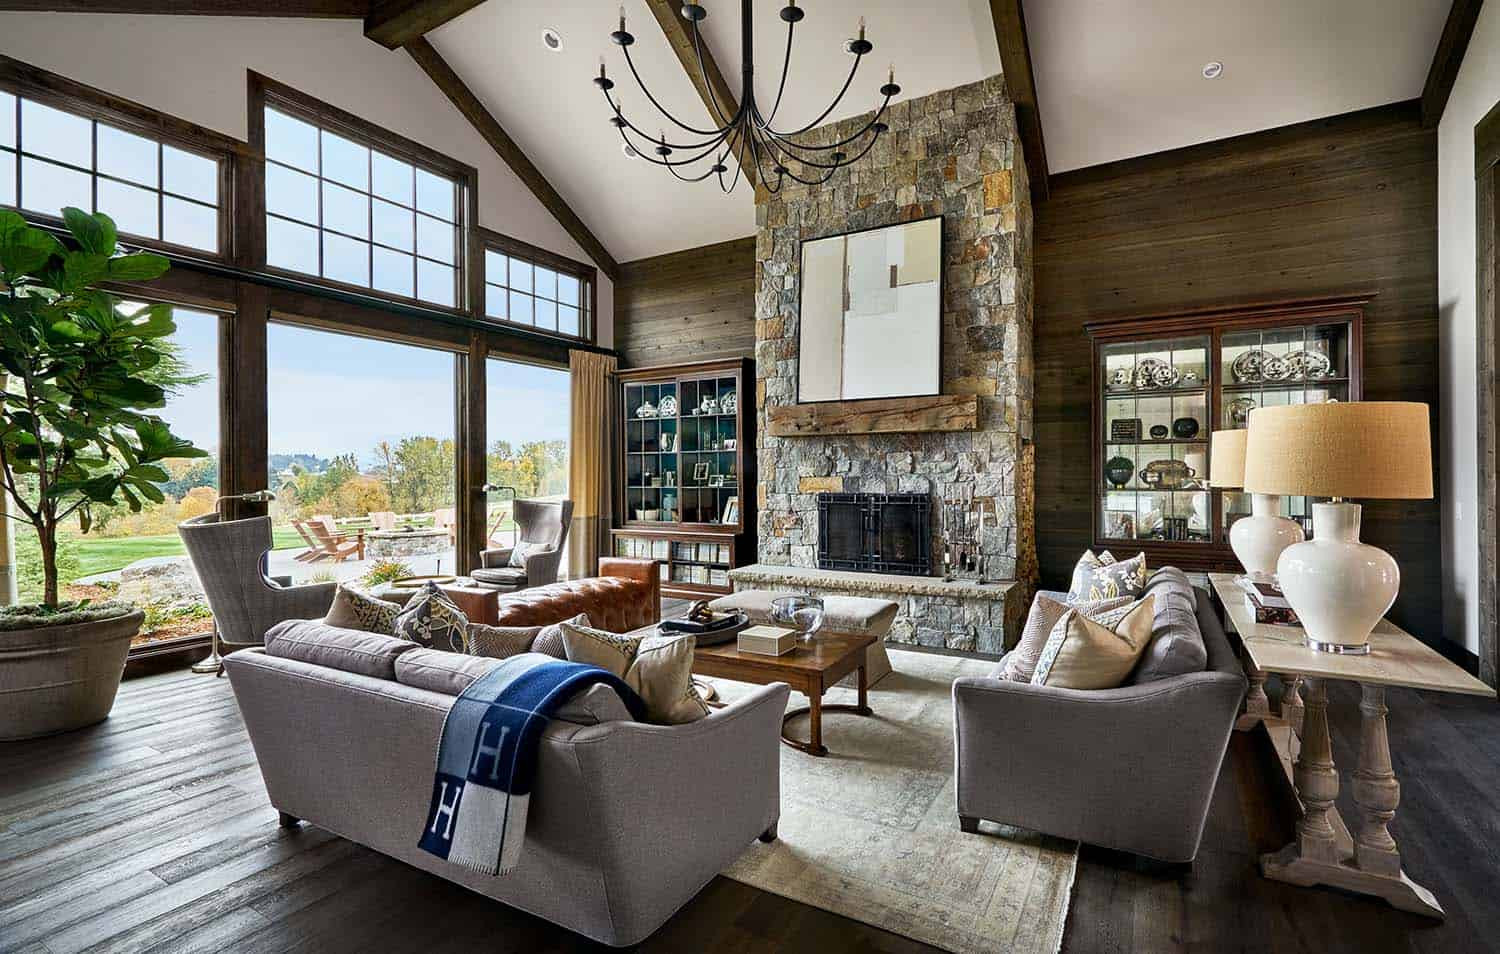 Rustic Modern Living Room
 Contemporary rustic farmhouse with stunning living spaces